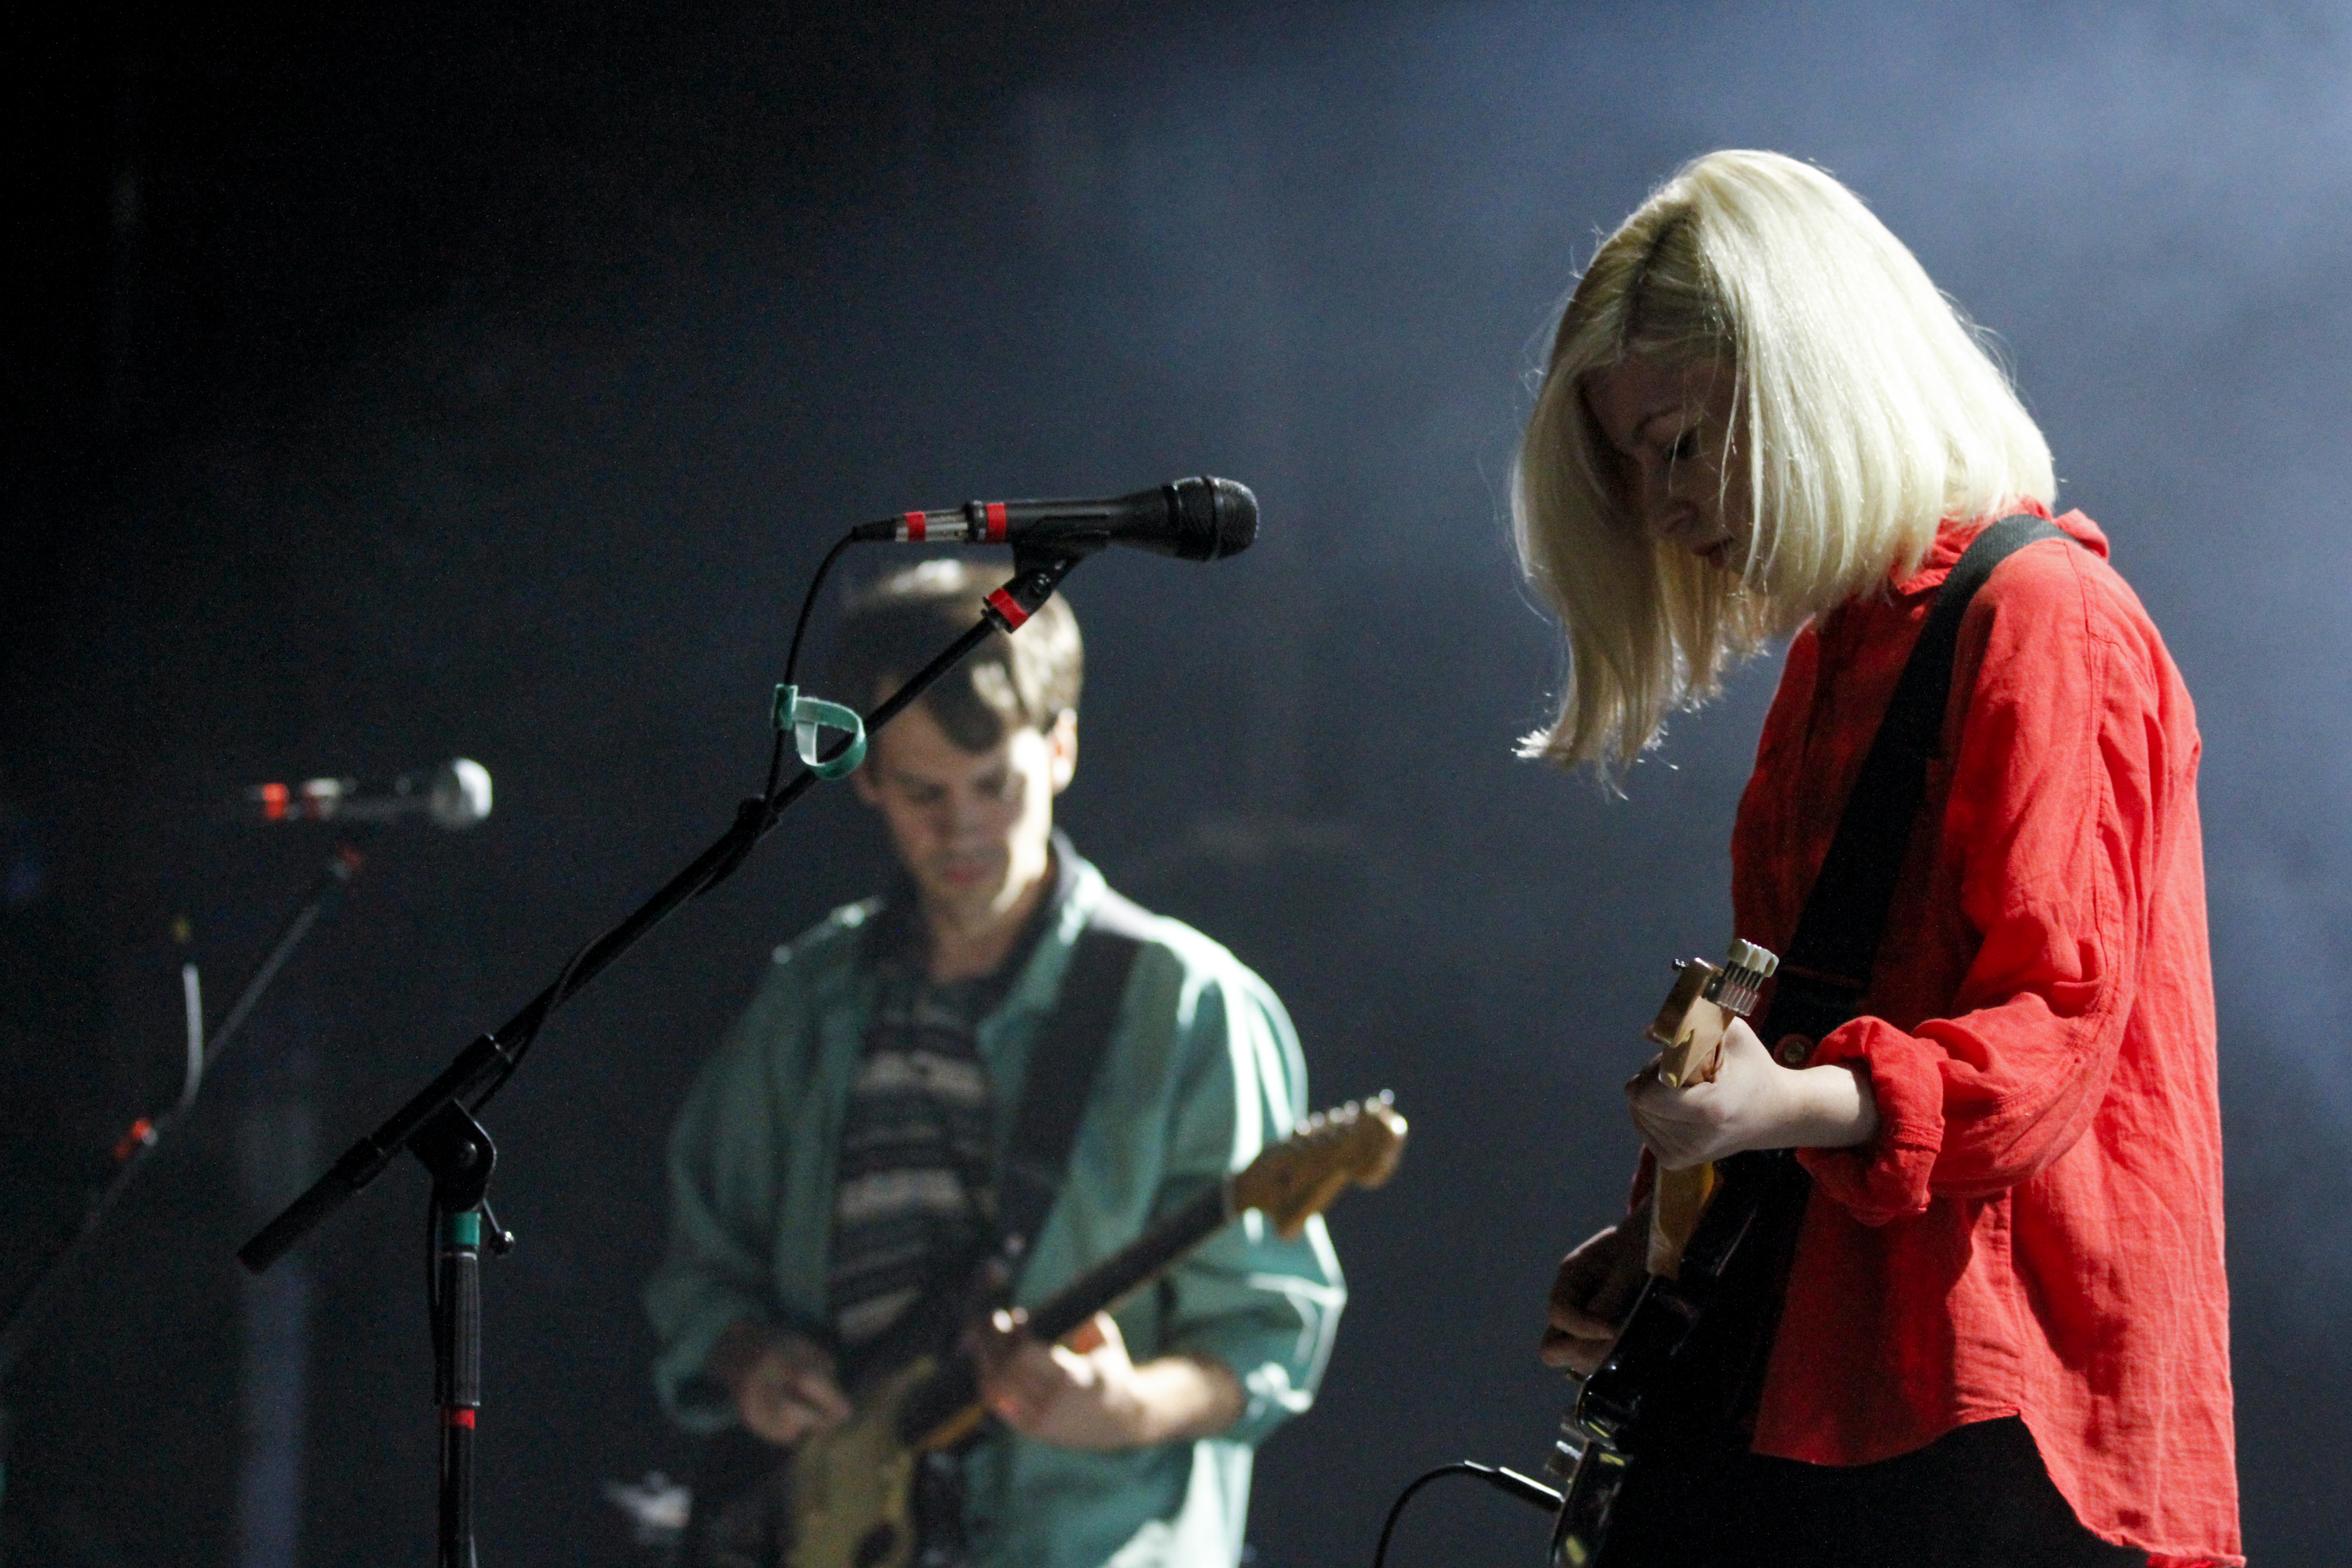 Alvvays plays at Brooklyn Steel in Williamsburg, Brooklyn, New York on Oct. 5, 2017. (© Michael Katzif - Do not use or republish without prior consent.)